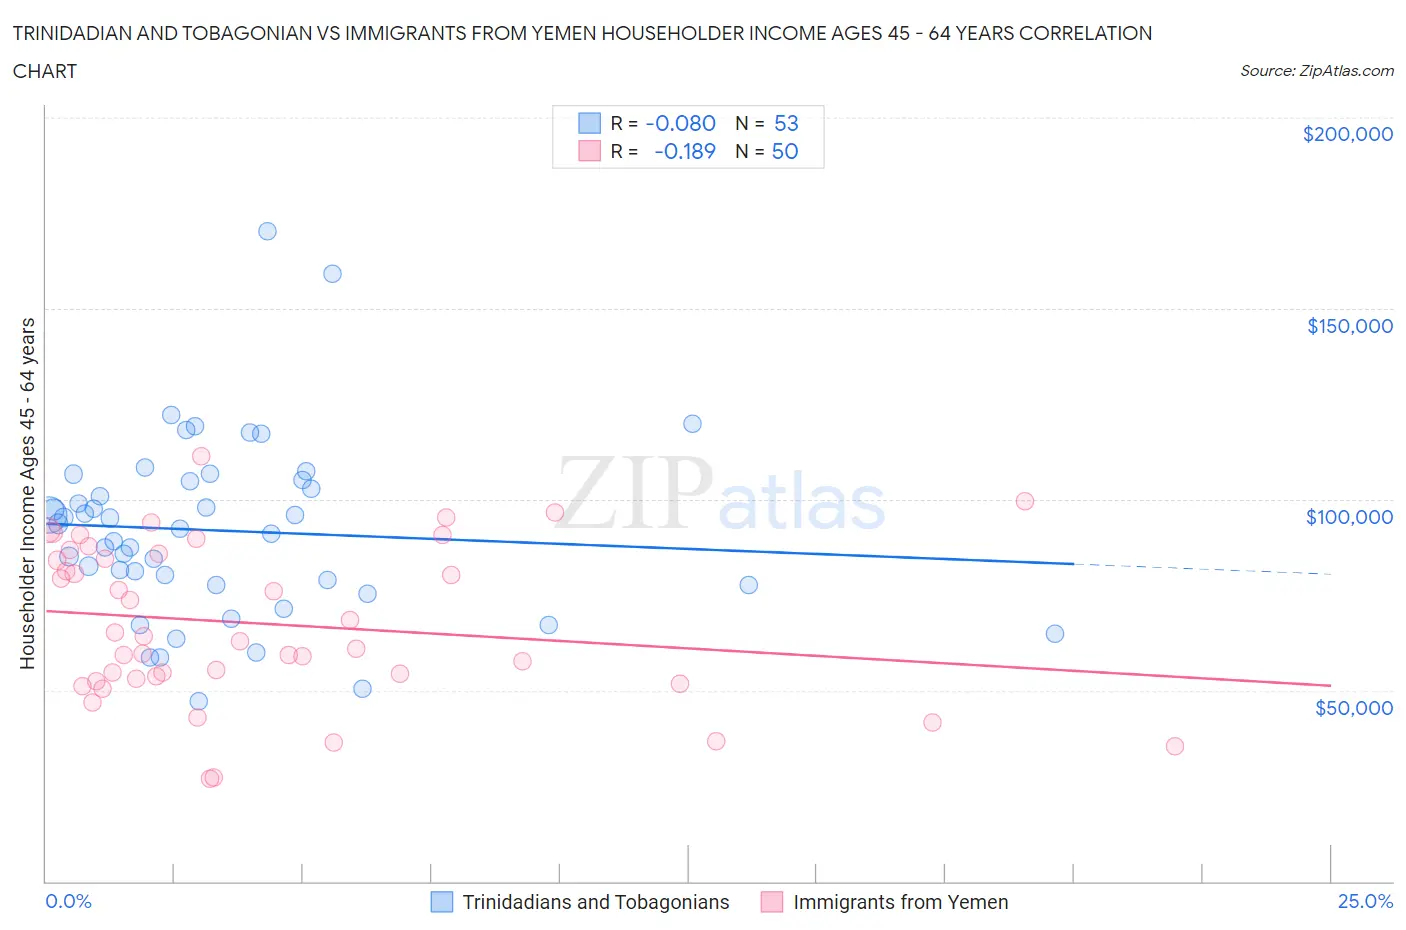 Trinidadian and Tobagonian vs Immigrants from Yemen Householder Income Ages 45 - 64 years